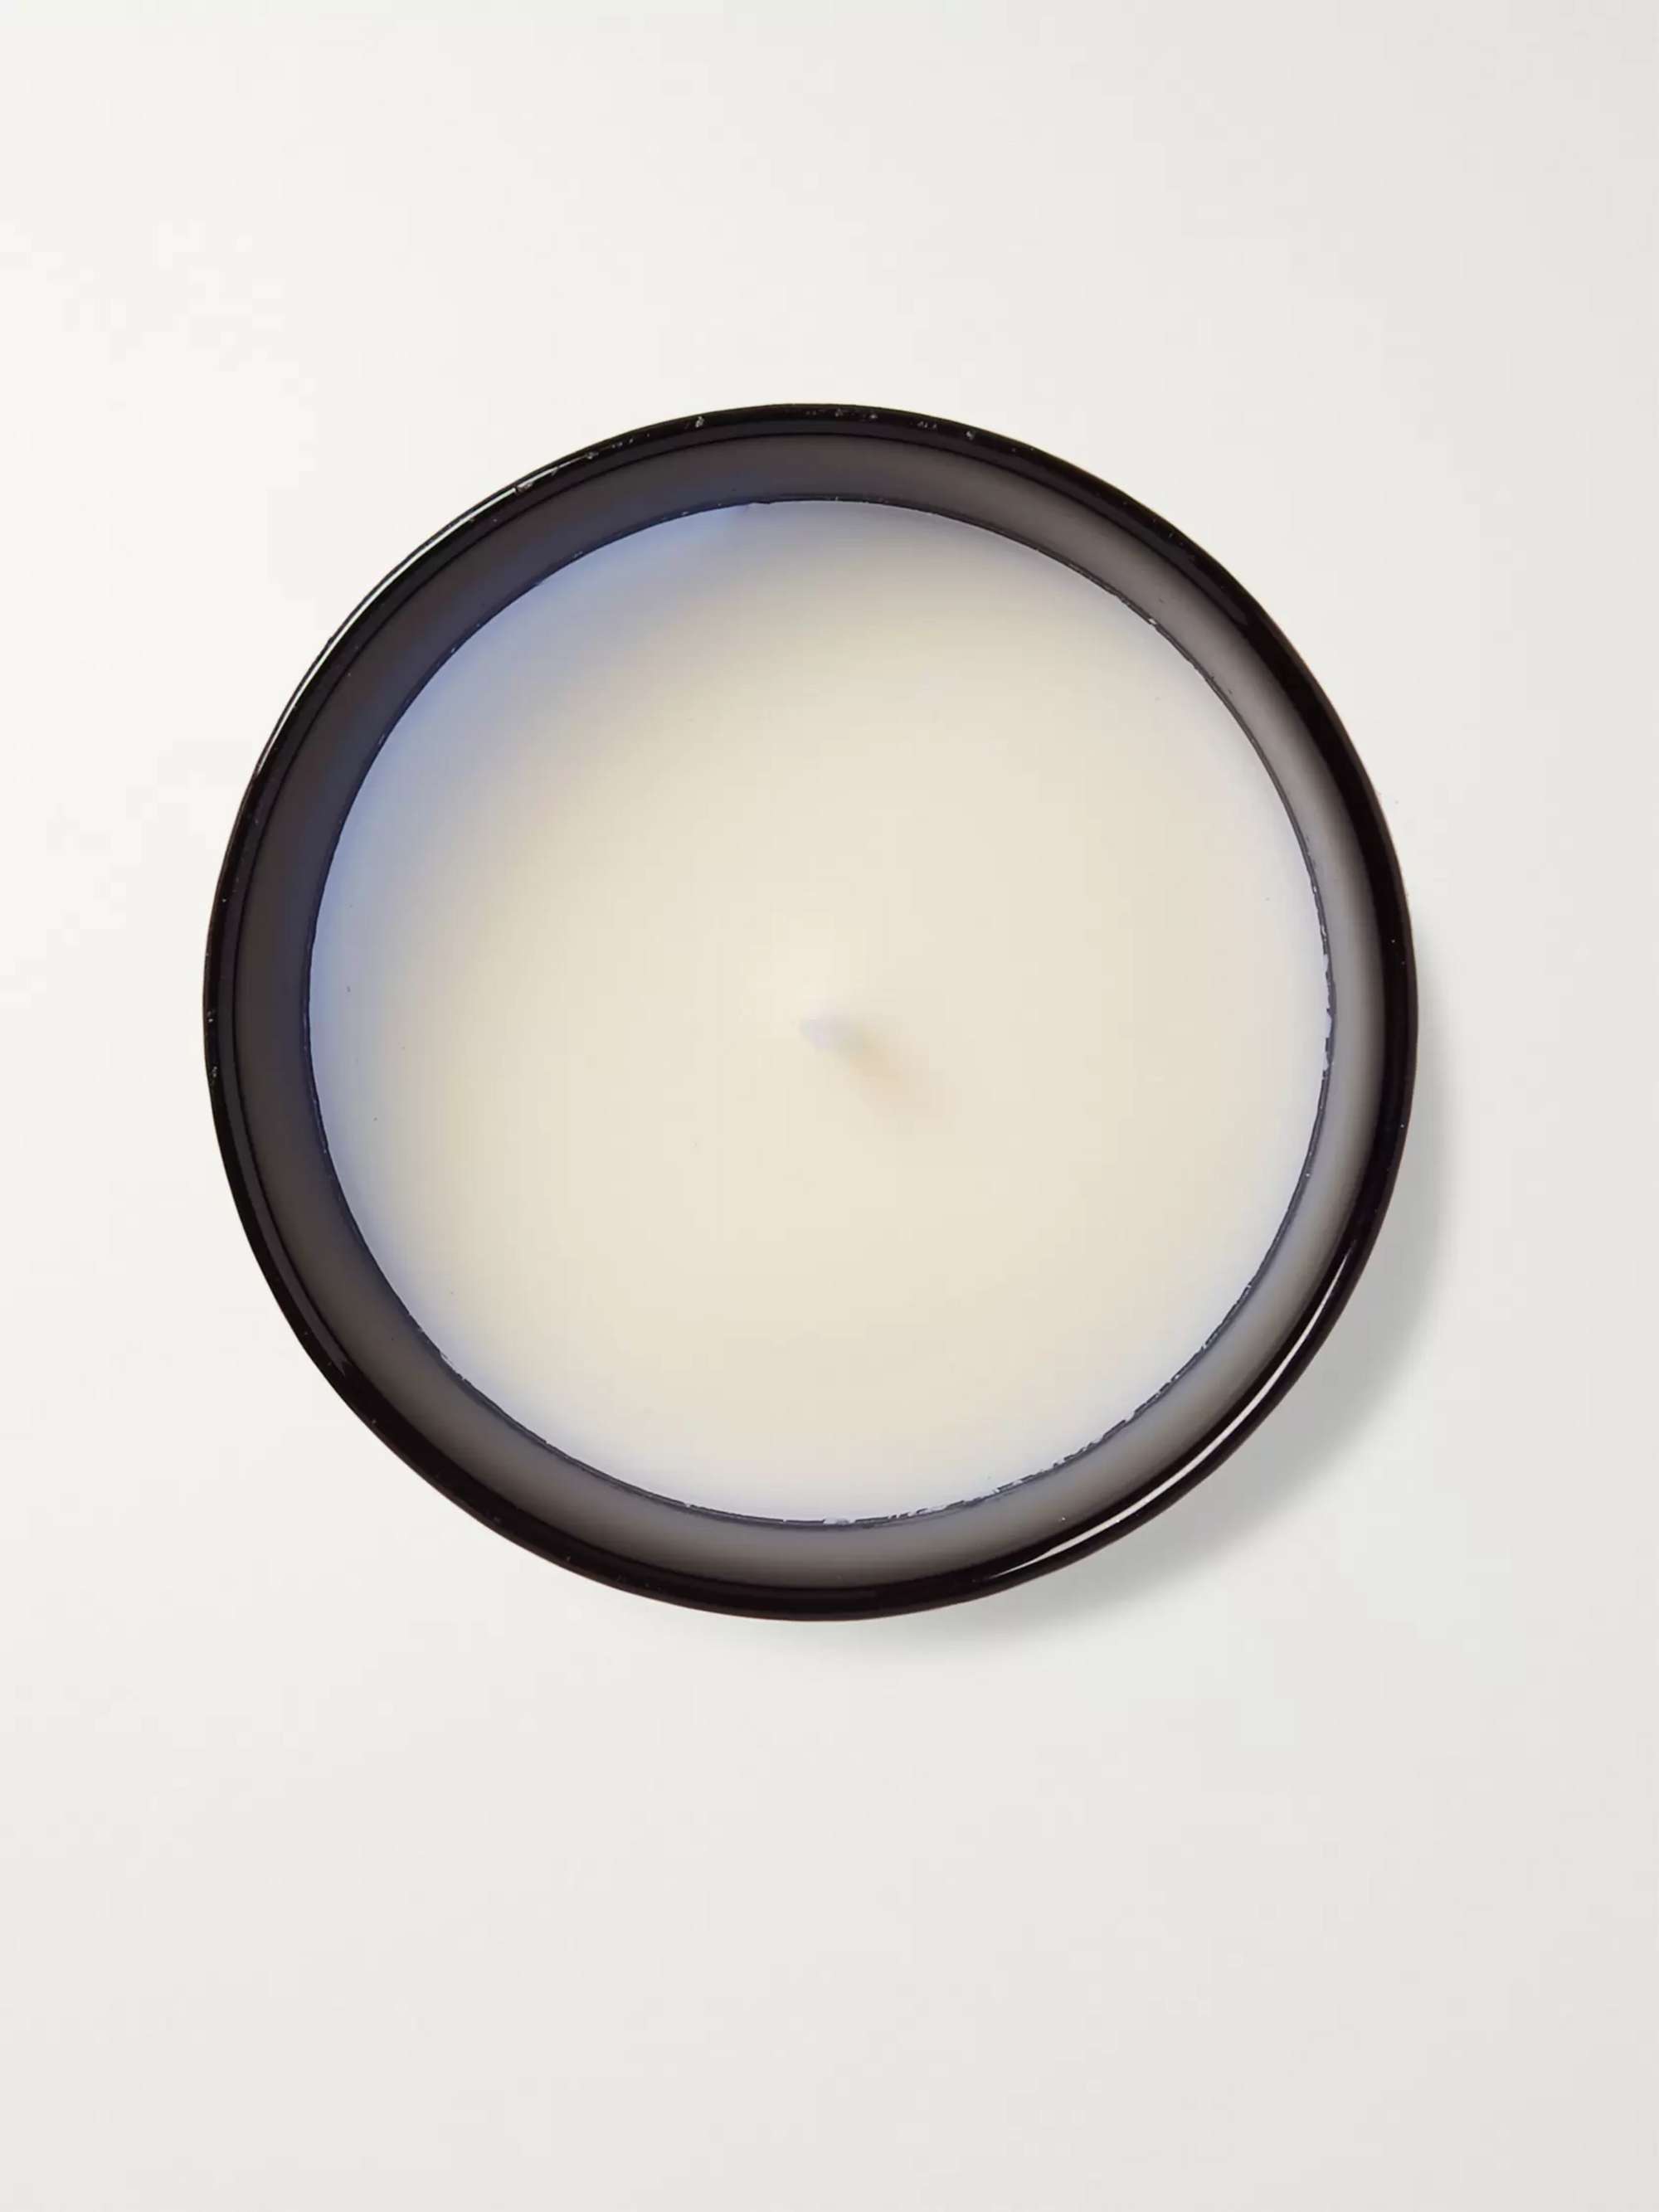 TRUDON Tadine Scented Candle, 270g